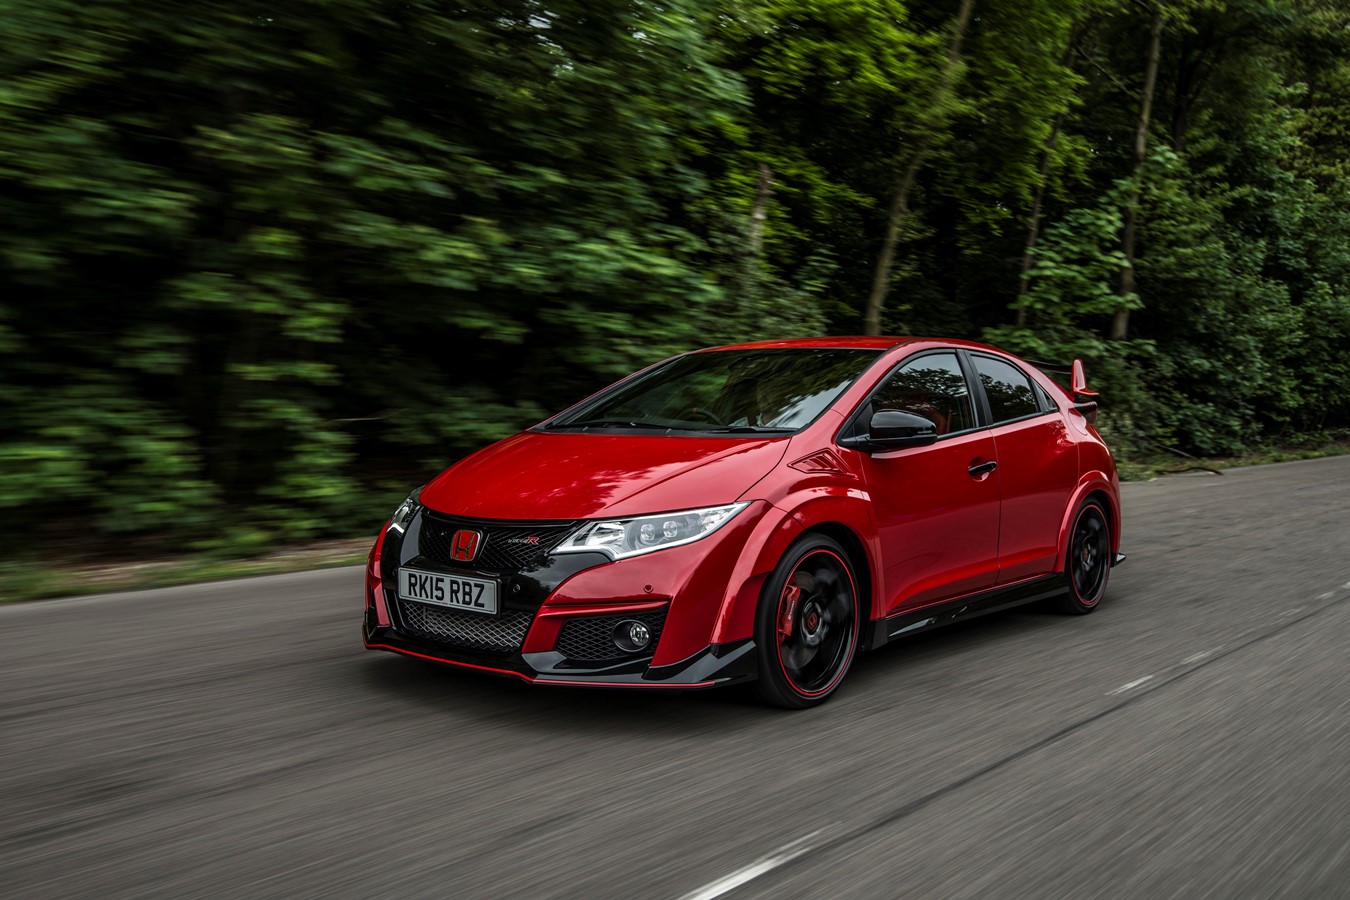 British-built Civic Type R roars into final five for coveted World Performance Car of the Year 2016 title